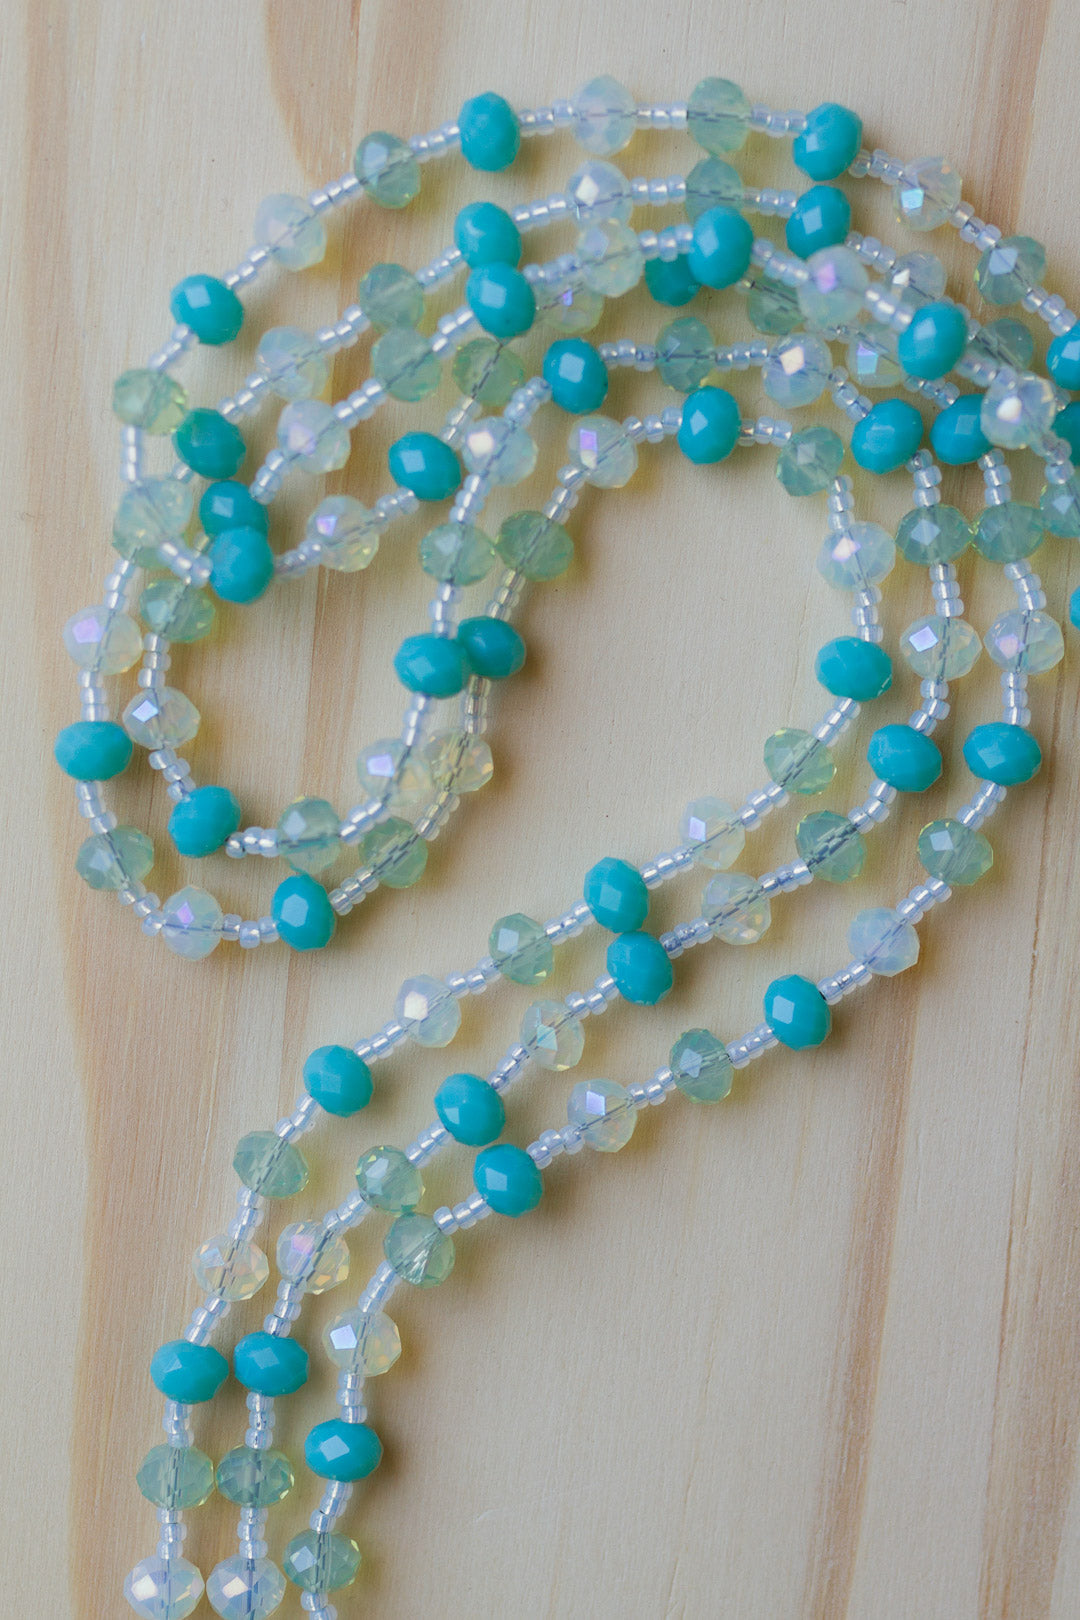 60" Extra Long Beaded Wraparound Necklace with Turquoise Peridot Green & Pale Lemon Crystal Beads _ My Urban Gems